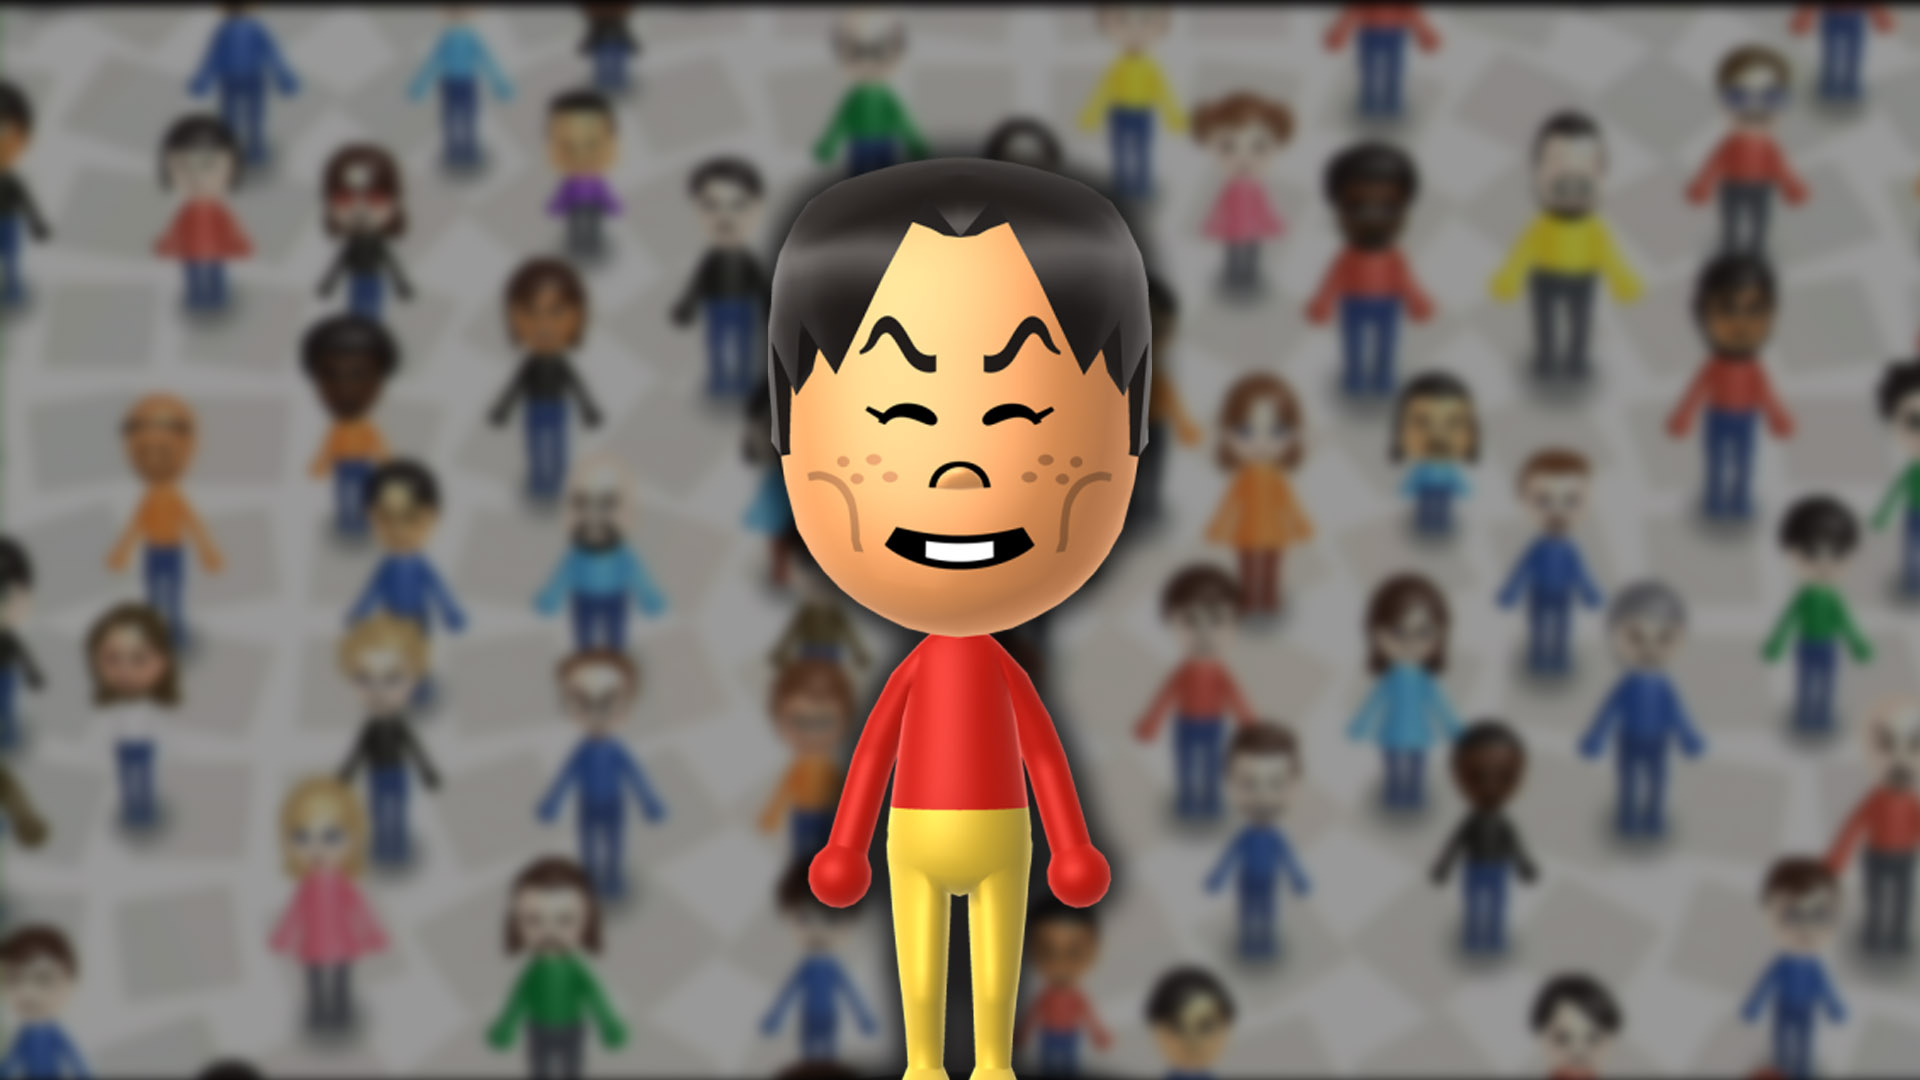 mii channel theme with long pauses